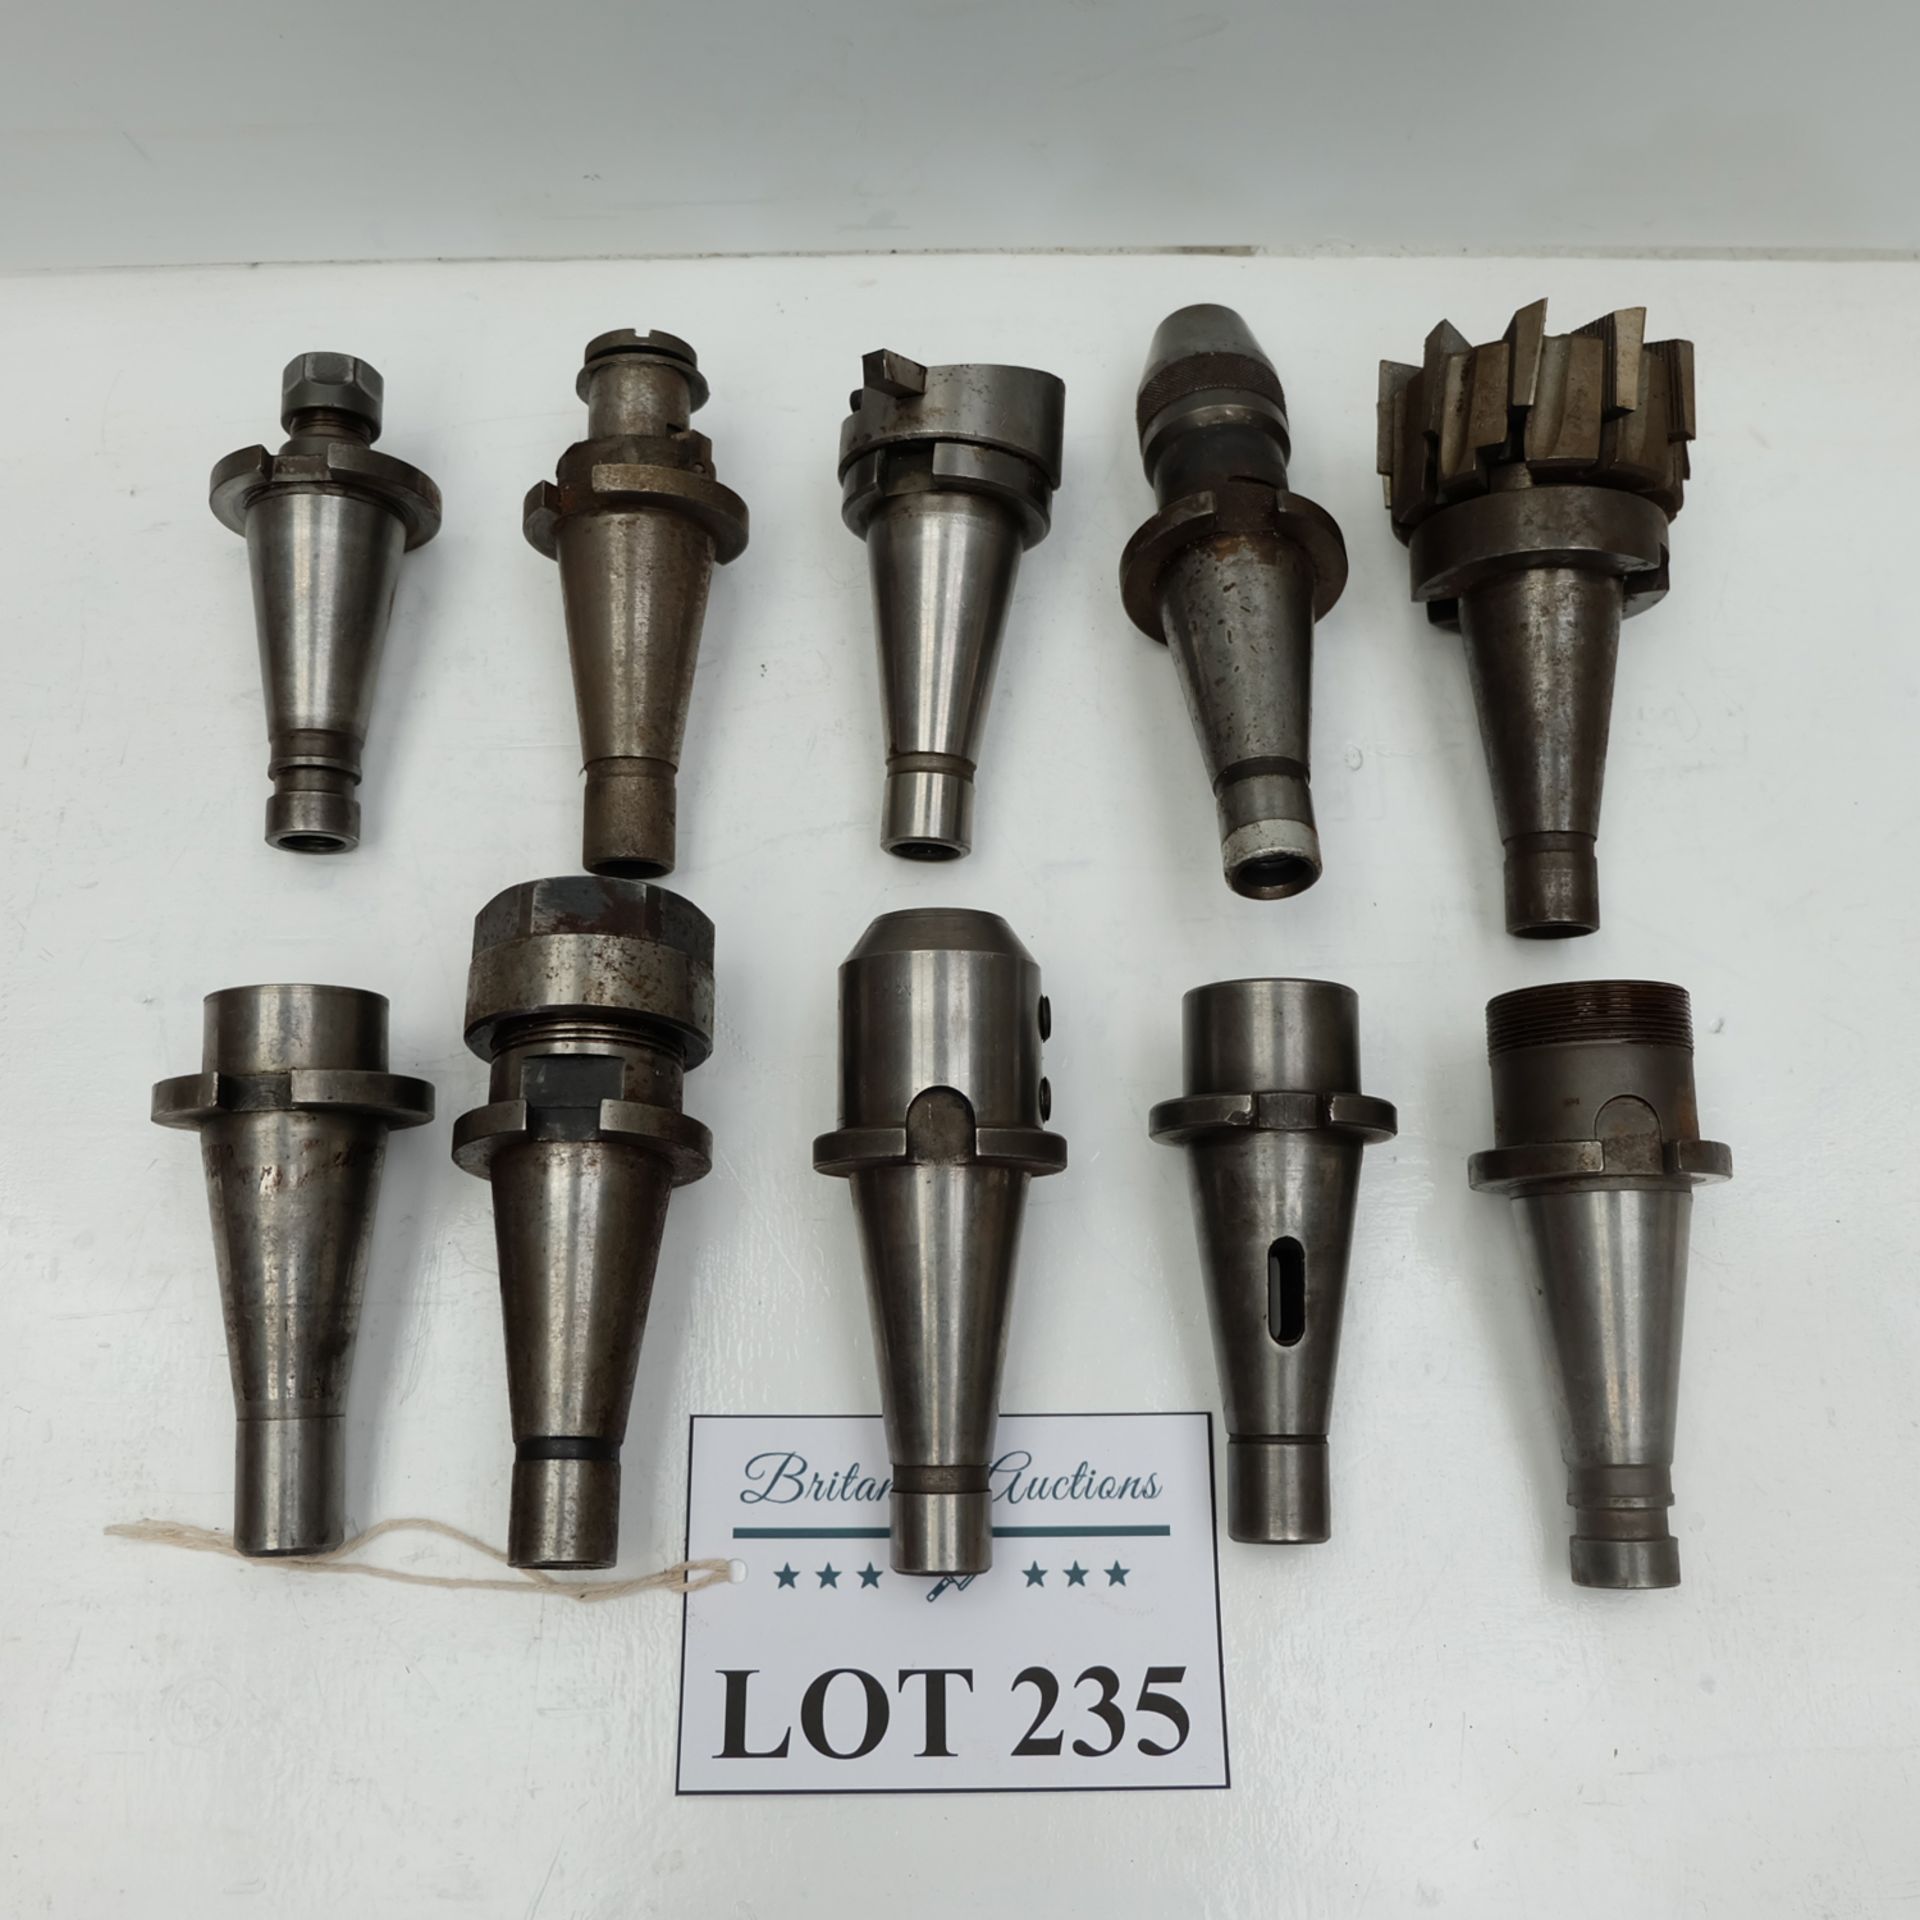 Quantity of 10 x 40 ISO Spindle Tooling. - Image 2 of 4